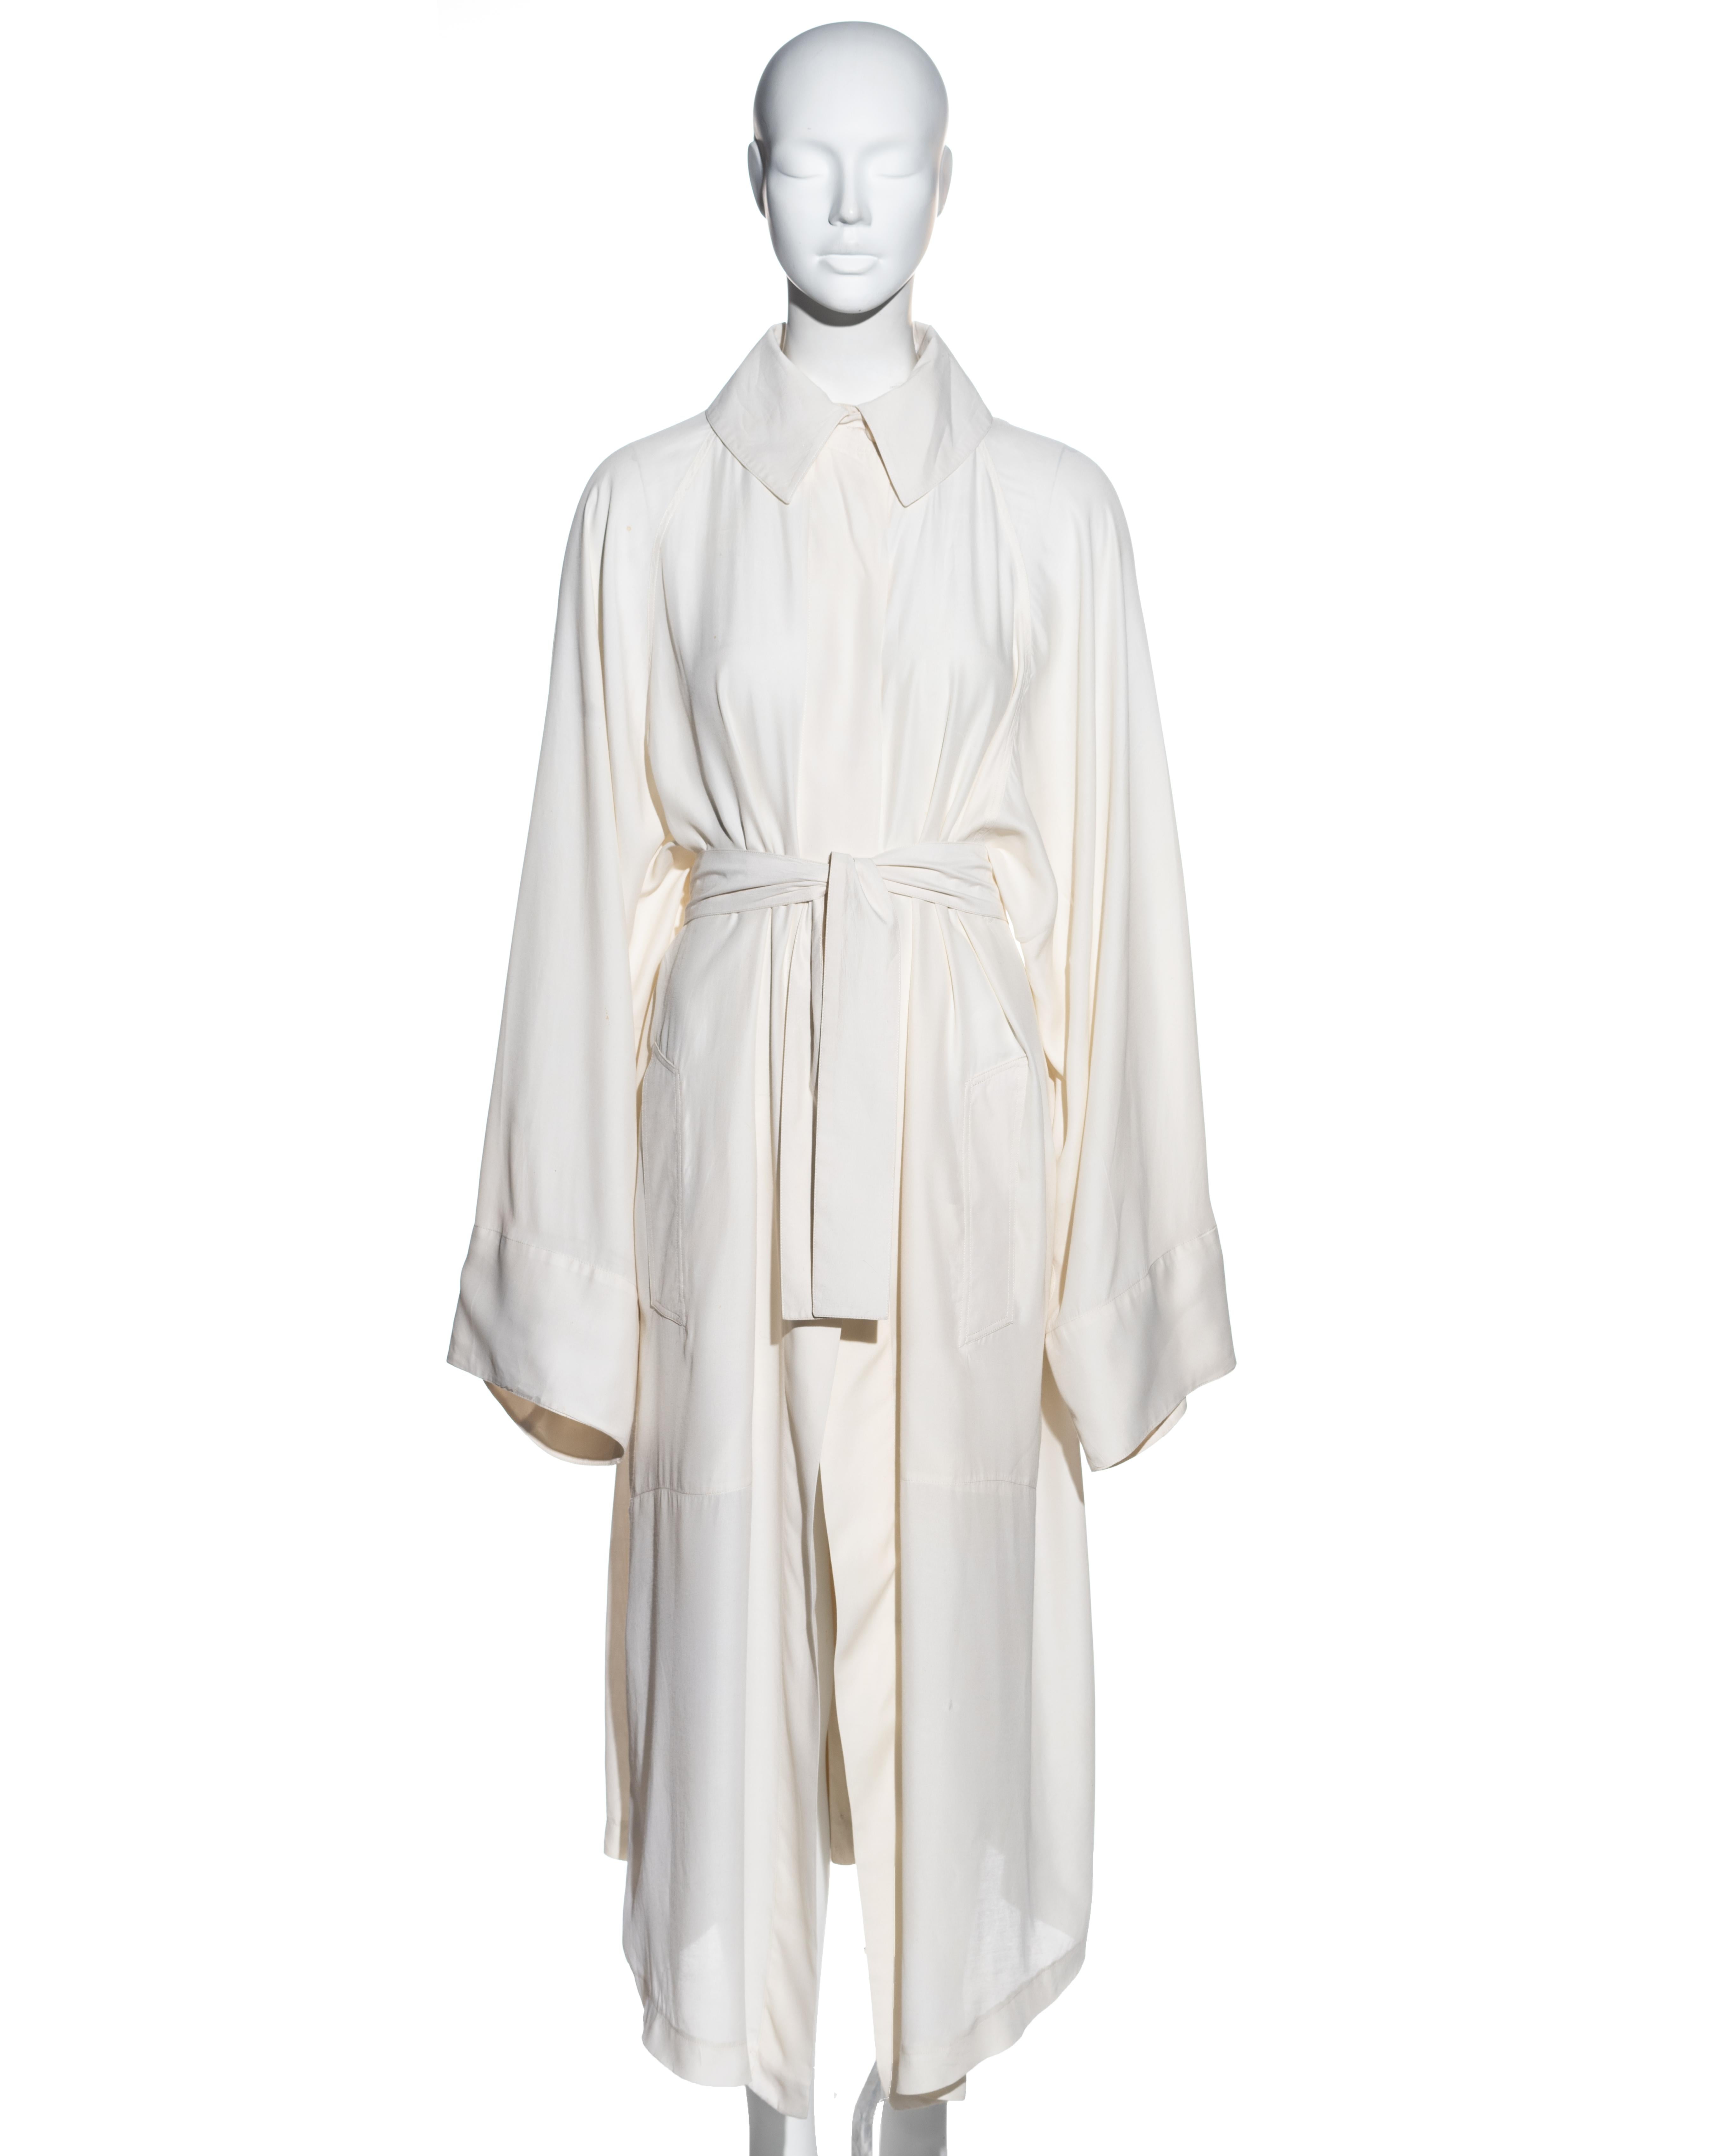 ▪ Azzedine Alaia cream cotton coat dress
▪ 2 button fastenings at collar 
▪ Wide cut sleeves 
▪ Voluminous shape 
▪ Pleated wrap skirt attached to back panel fastening with two long bands at the waist 
▪ Button fastenings on skirt 
▪ Vertical slit